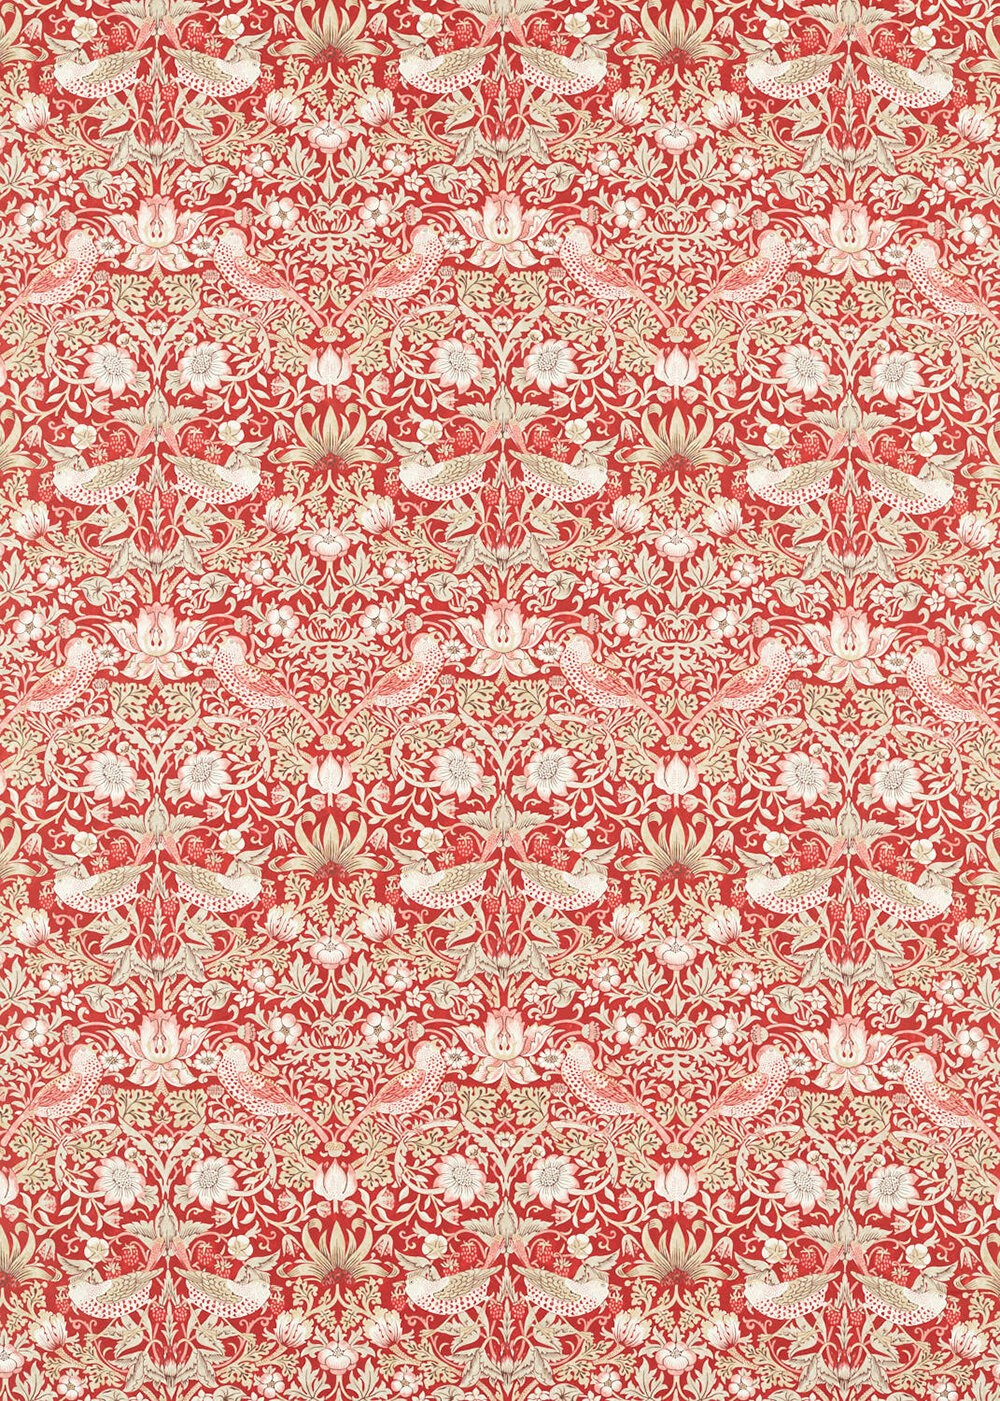 Strawberry Thief Fabric - Indian Red - by Morris